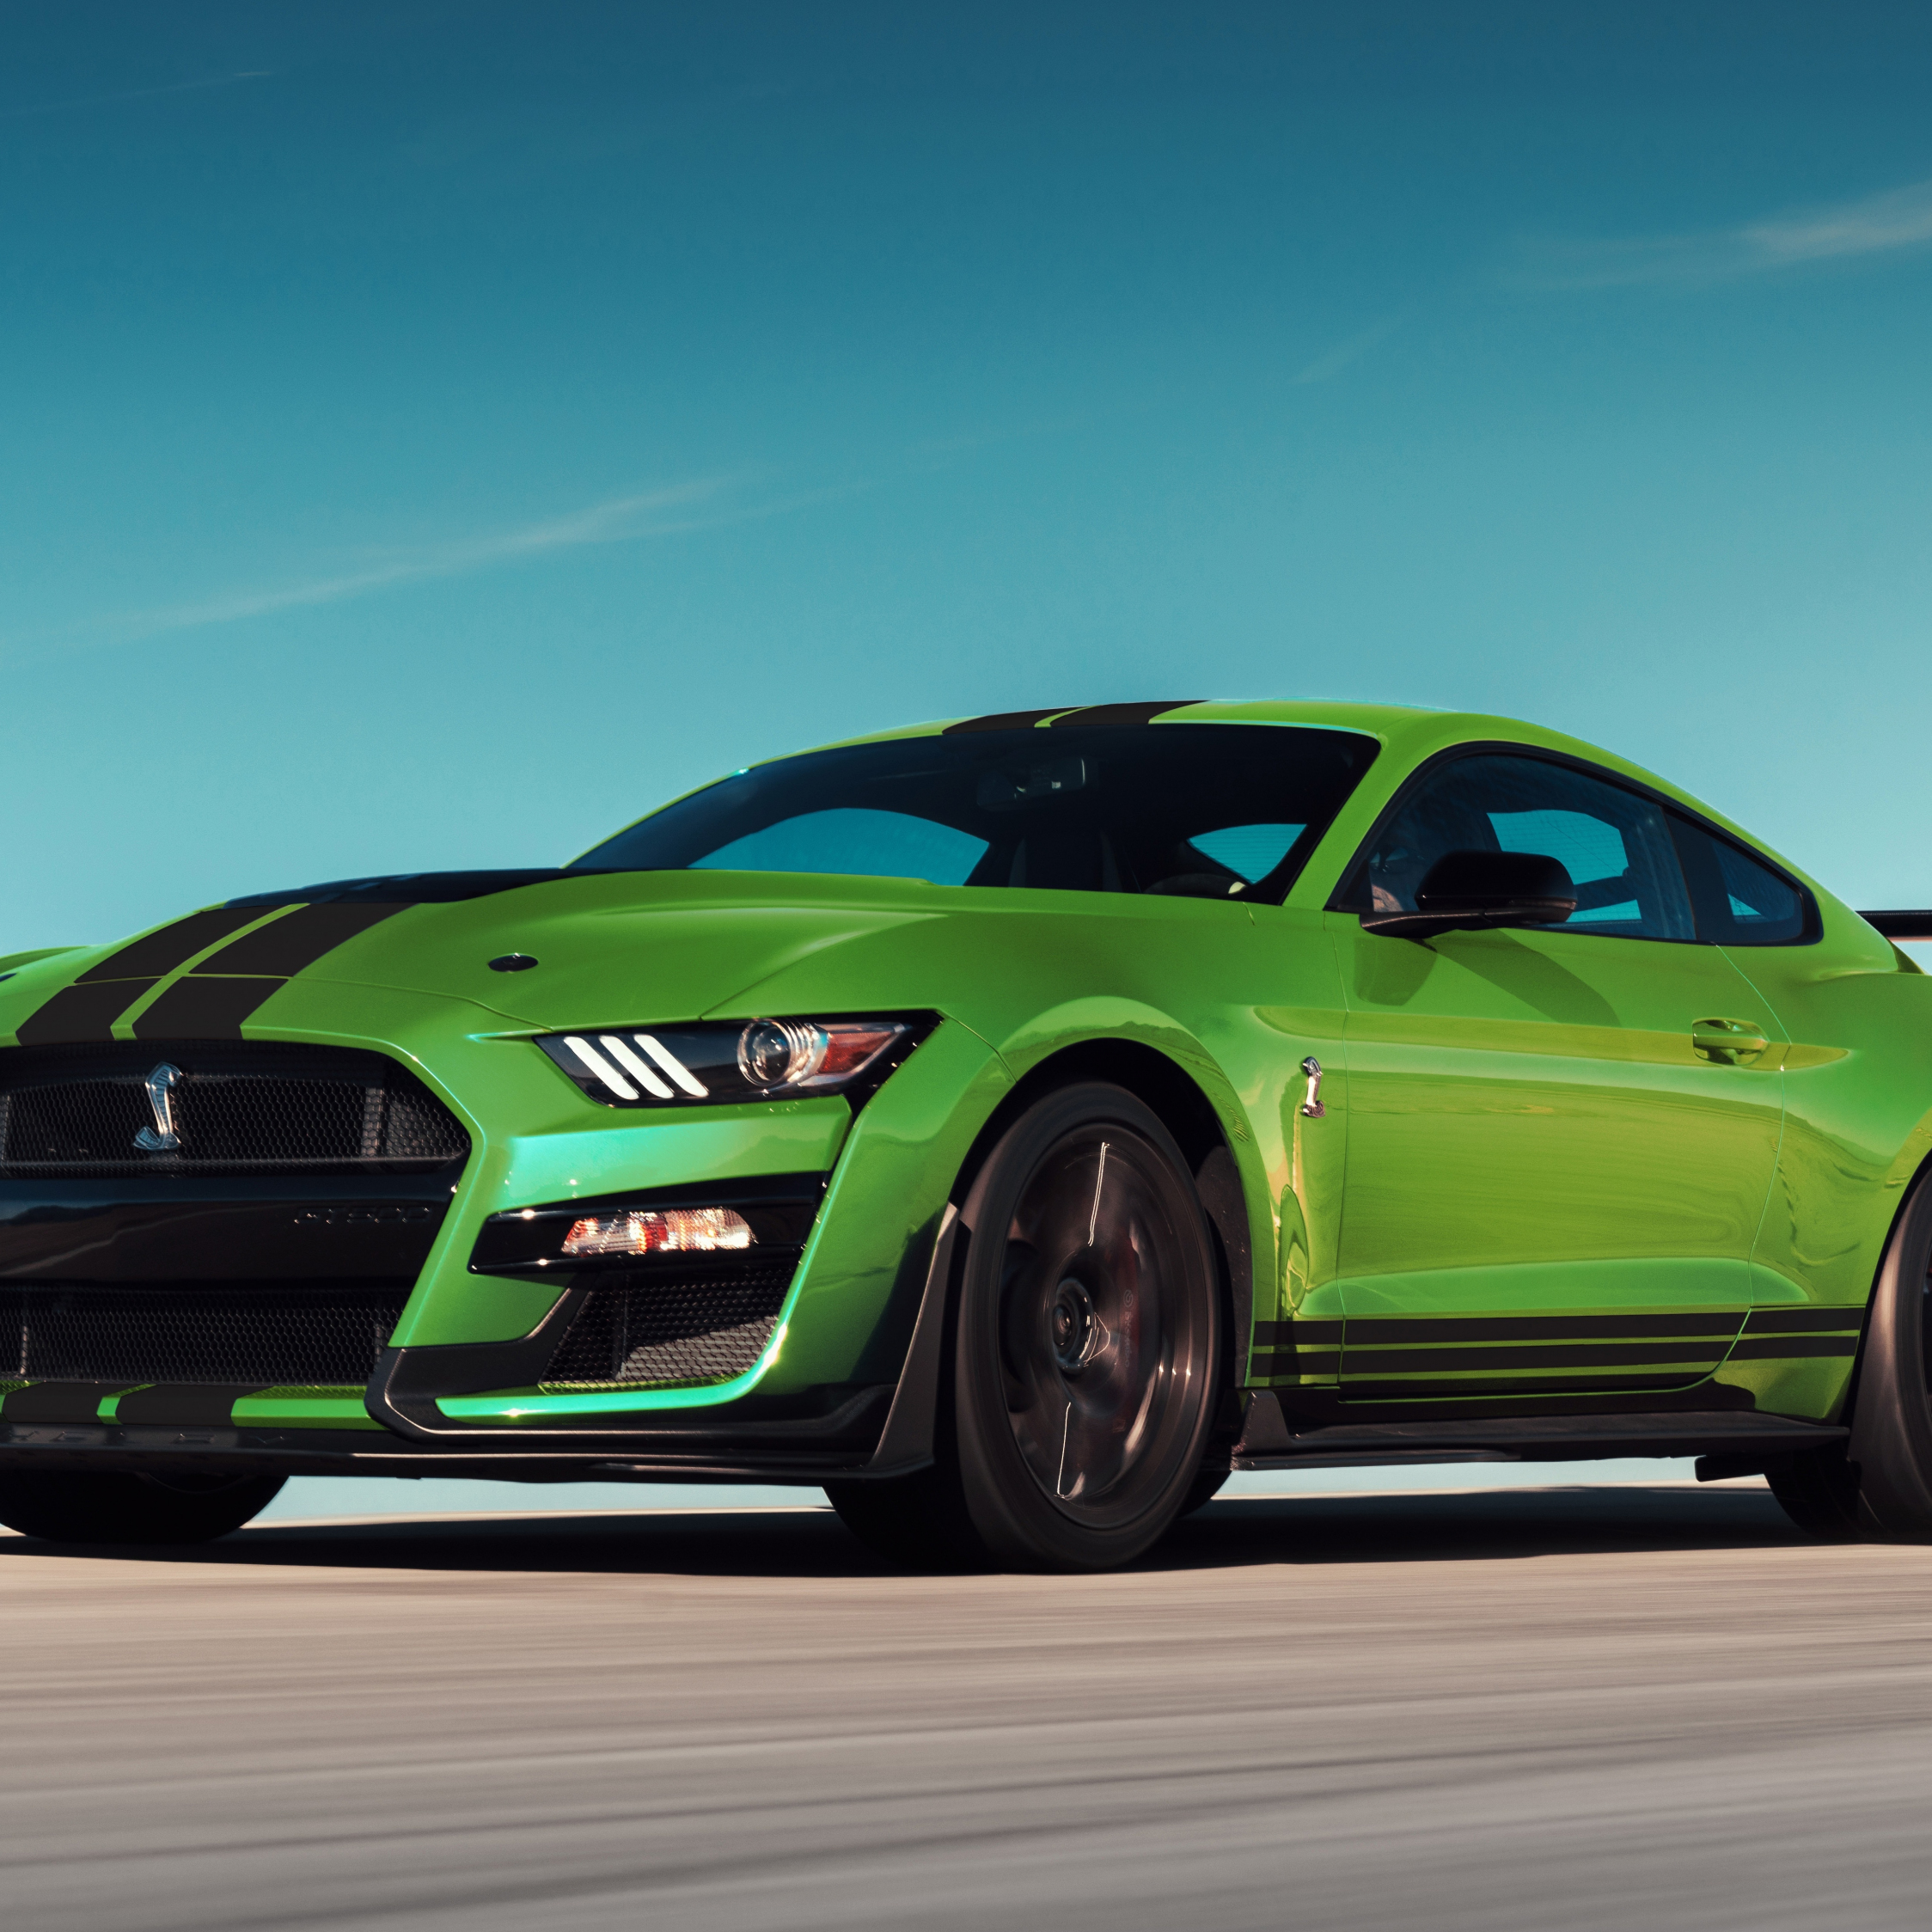 Download green, ford mustang shelby gt500 2248x2248 wallpaper, ipad air, ipad air ipad ipad ipad mini ipad mini 2248x2248 HD image, background, 24402